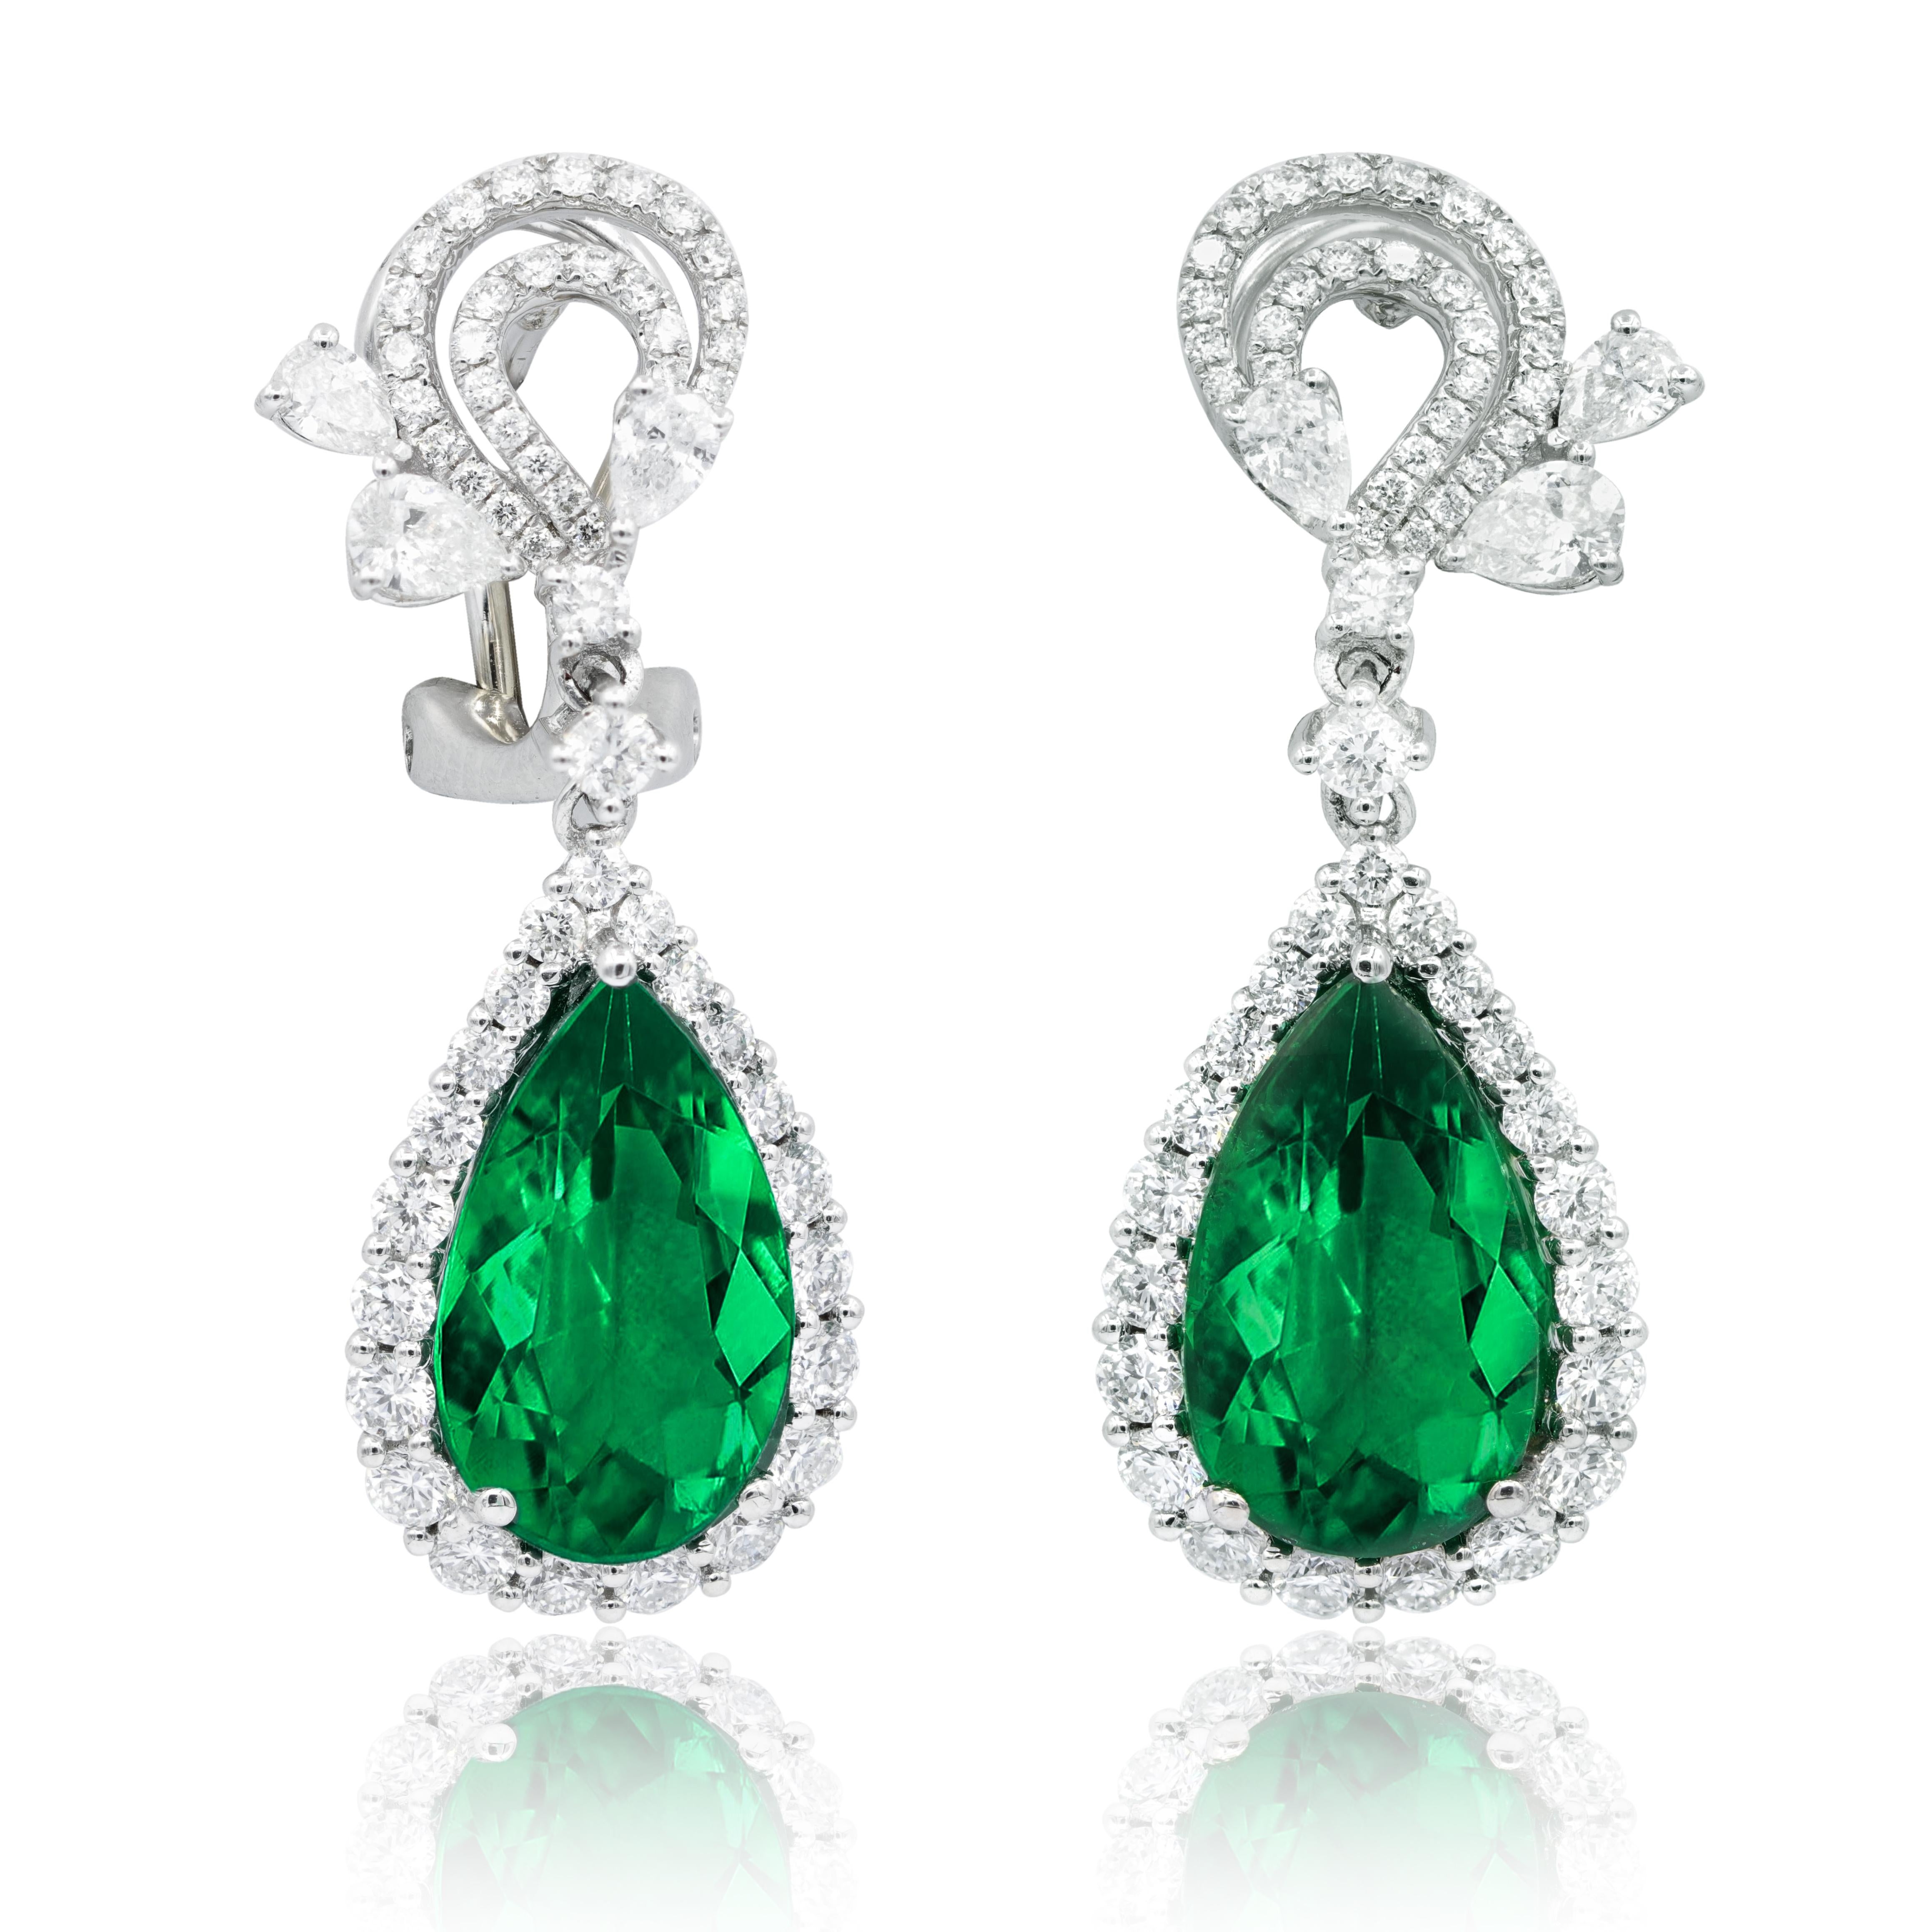 18KT white gold fashion drop earrings features 2.28 cts of white round and pear shaped diamonds and 8.73 cts of pear shaped emeralds.

This product will be packaged in a custom box

Composition:
18K white gold
2.28 ct round and pear shaped